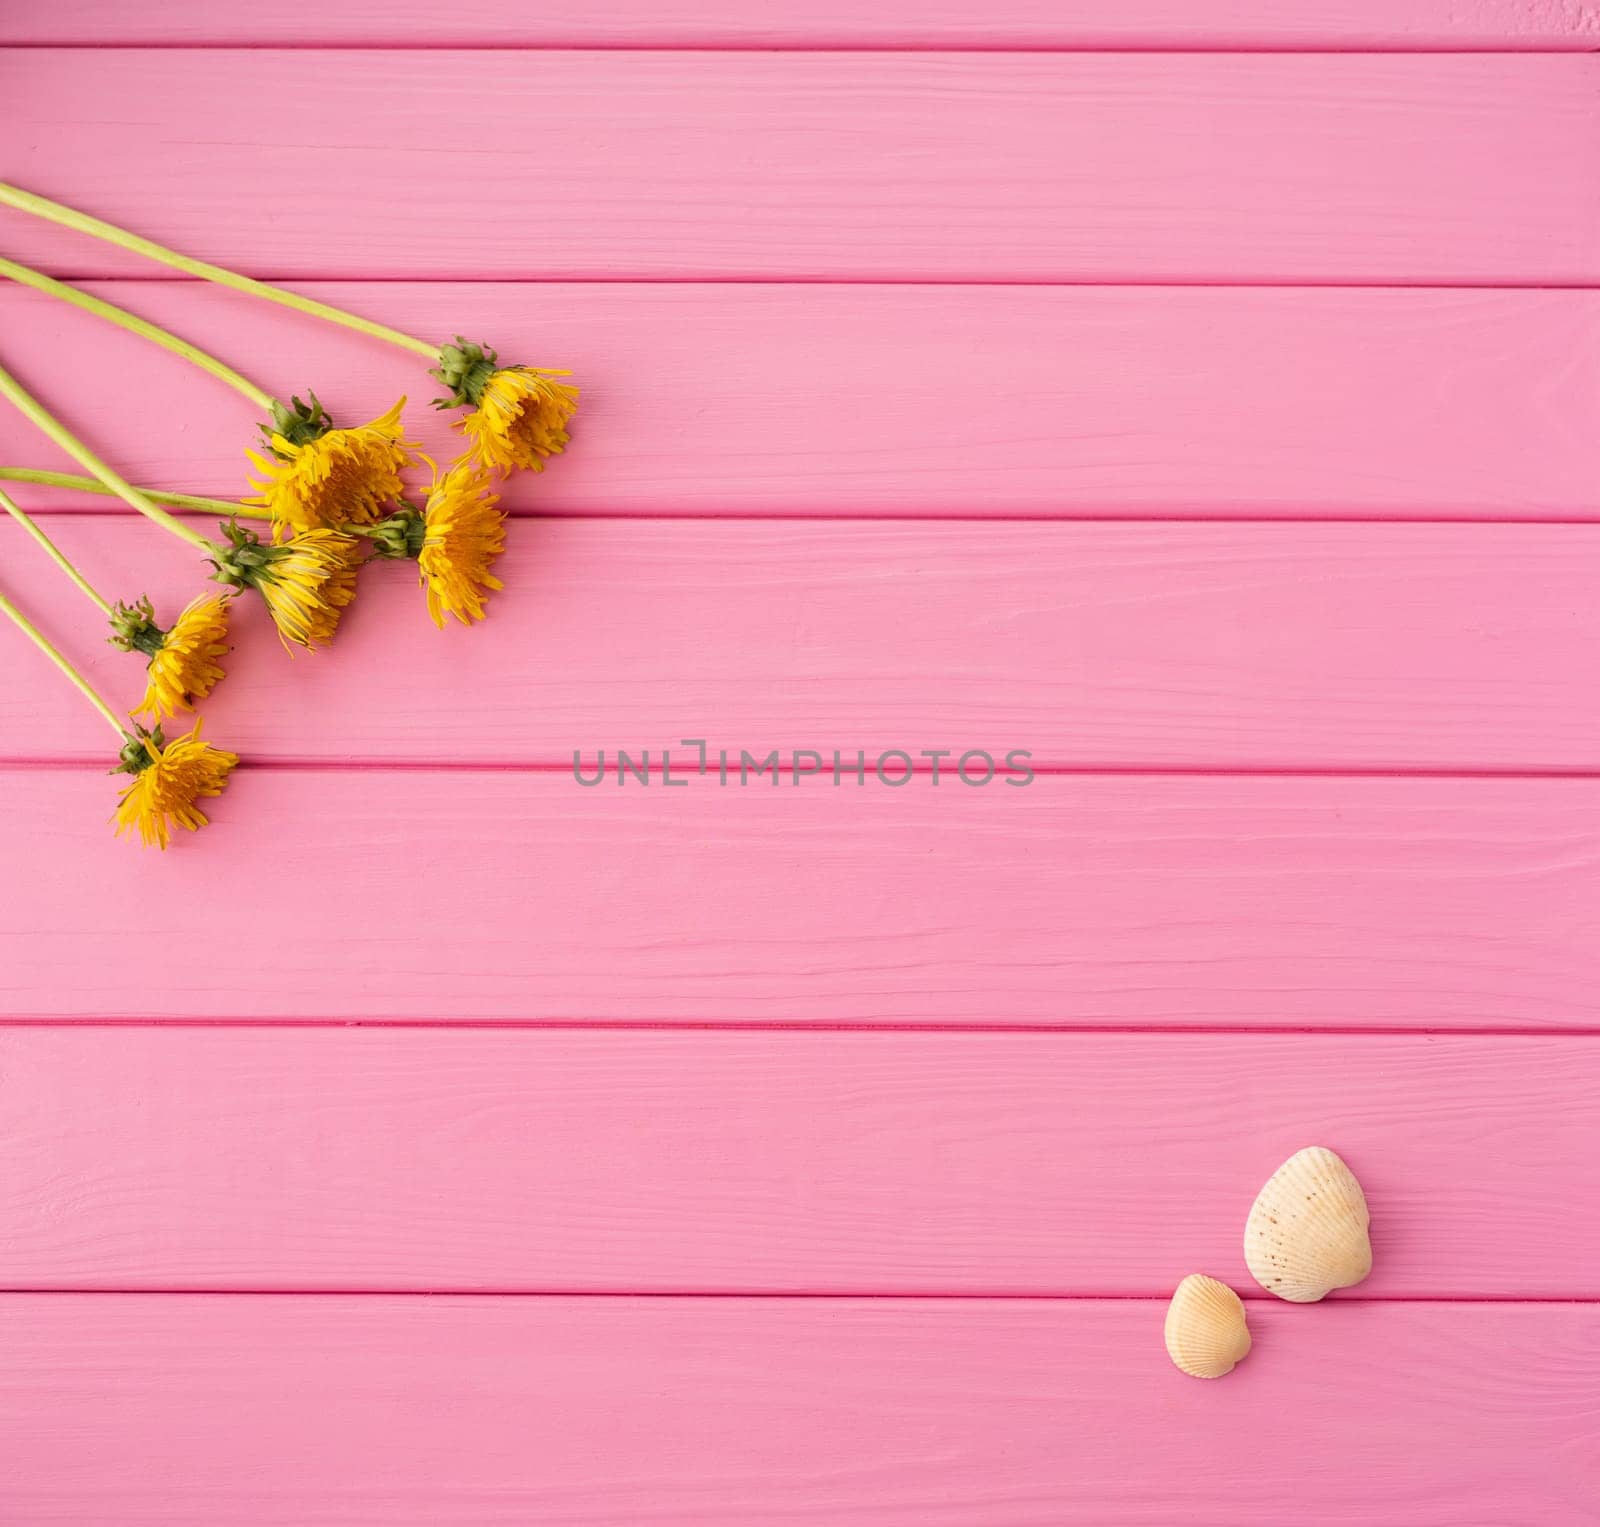 Summer abstract background mockup template free copy space text pattern sample top view above on pink wooden board. blank empty area for inscription. corners flowers borders frames yellow dandelions